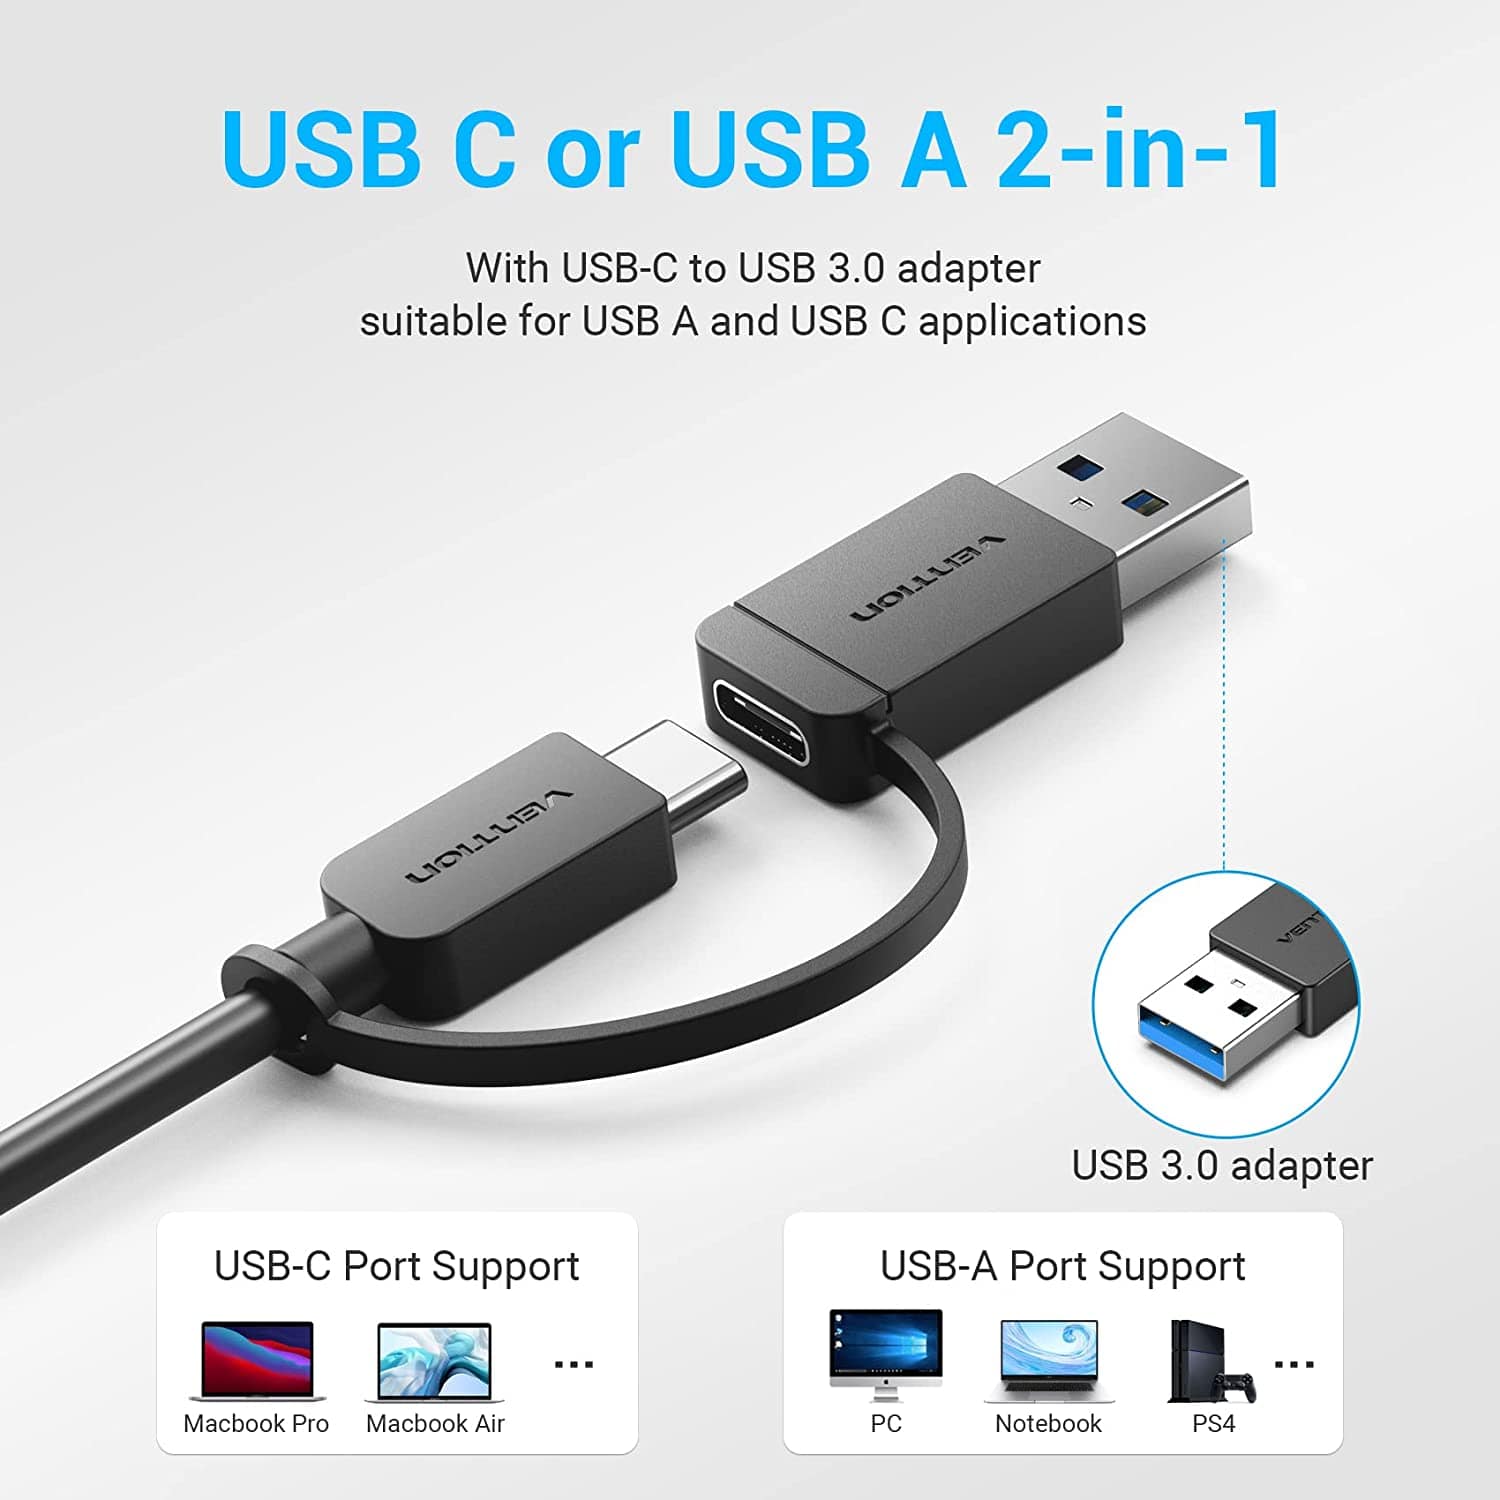 5 Port USB hub with powered MicroUSB port - USB or USB-C version available